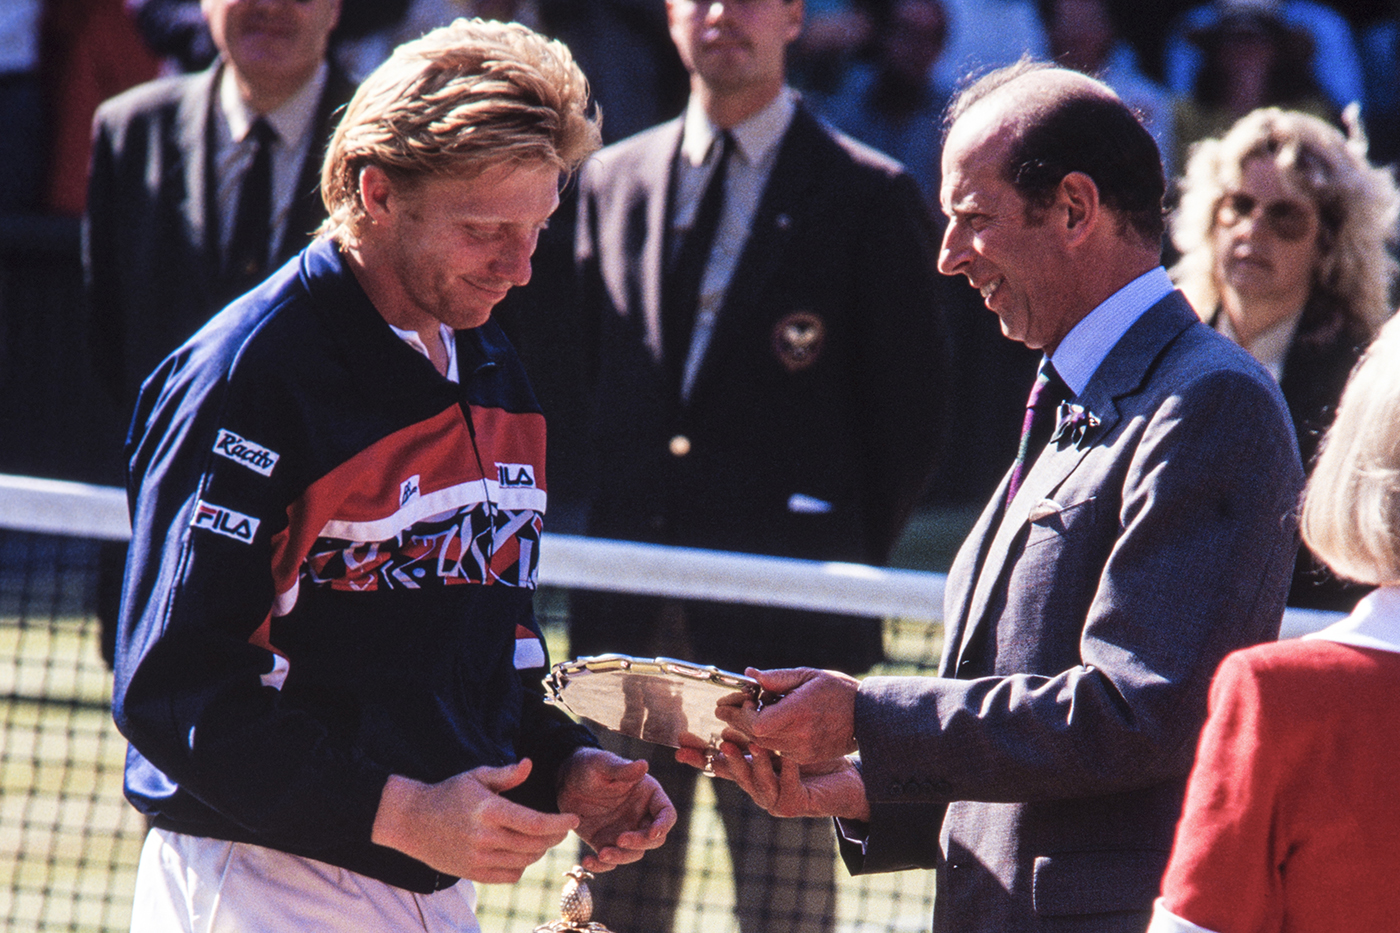 Aeltc Duke Of Kent Retires President The Championships Wimbledon 21 Official Site By Ibm